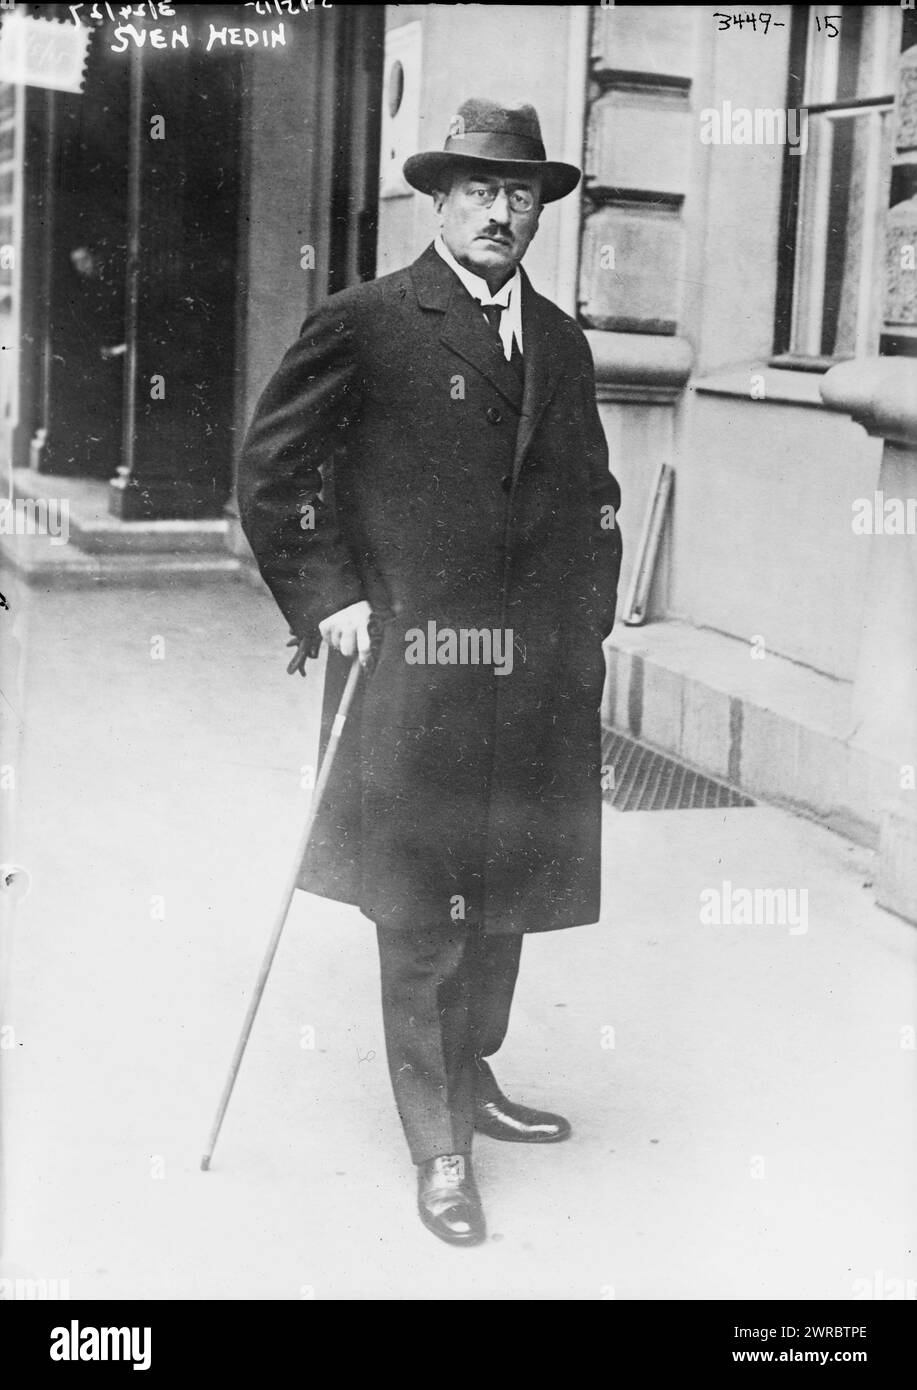 Sven Hedin, Photograph shows Sven Anders Hedin (1865-1952), a Swedish geographer, explorer, and travel writer., 1927 March 24, Glass negatives, 1 negative: glass Stock Photo